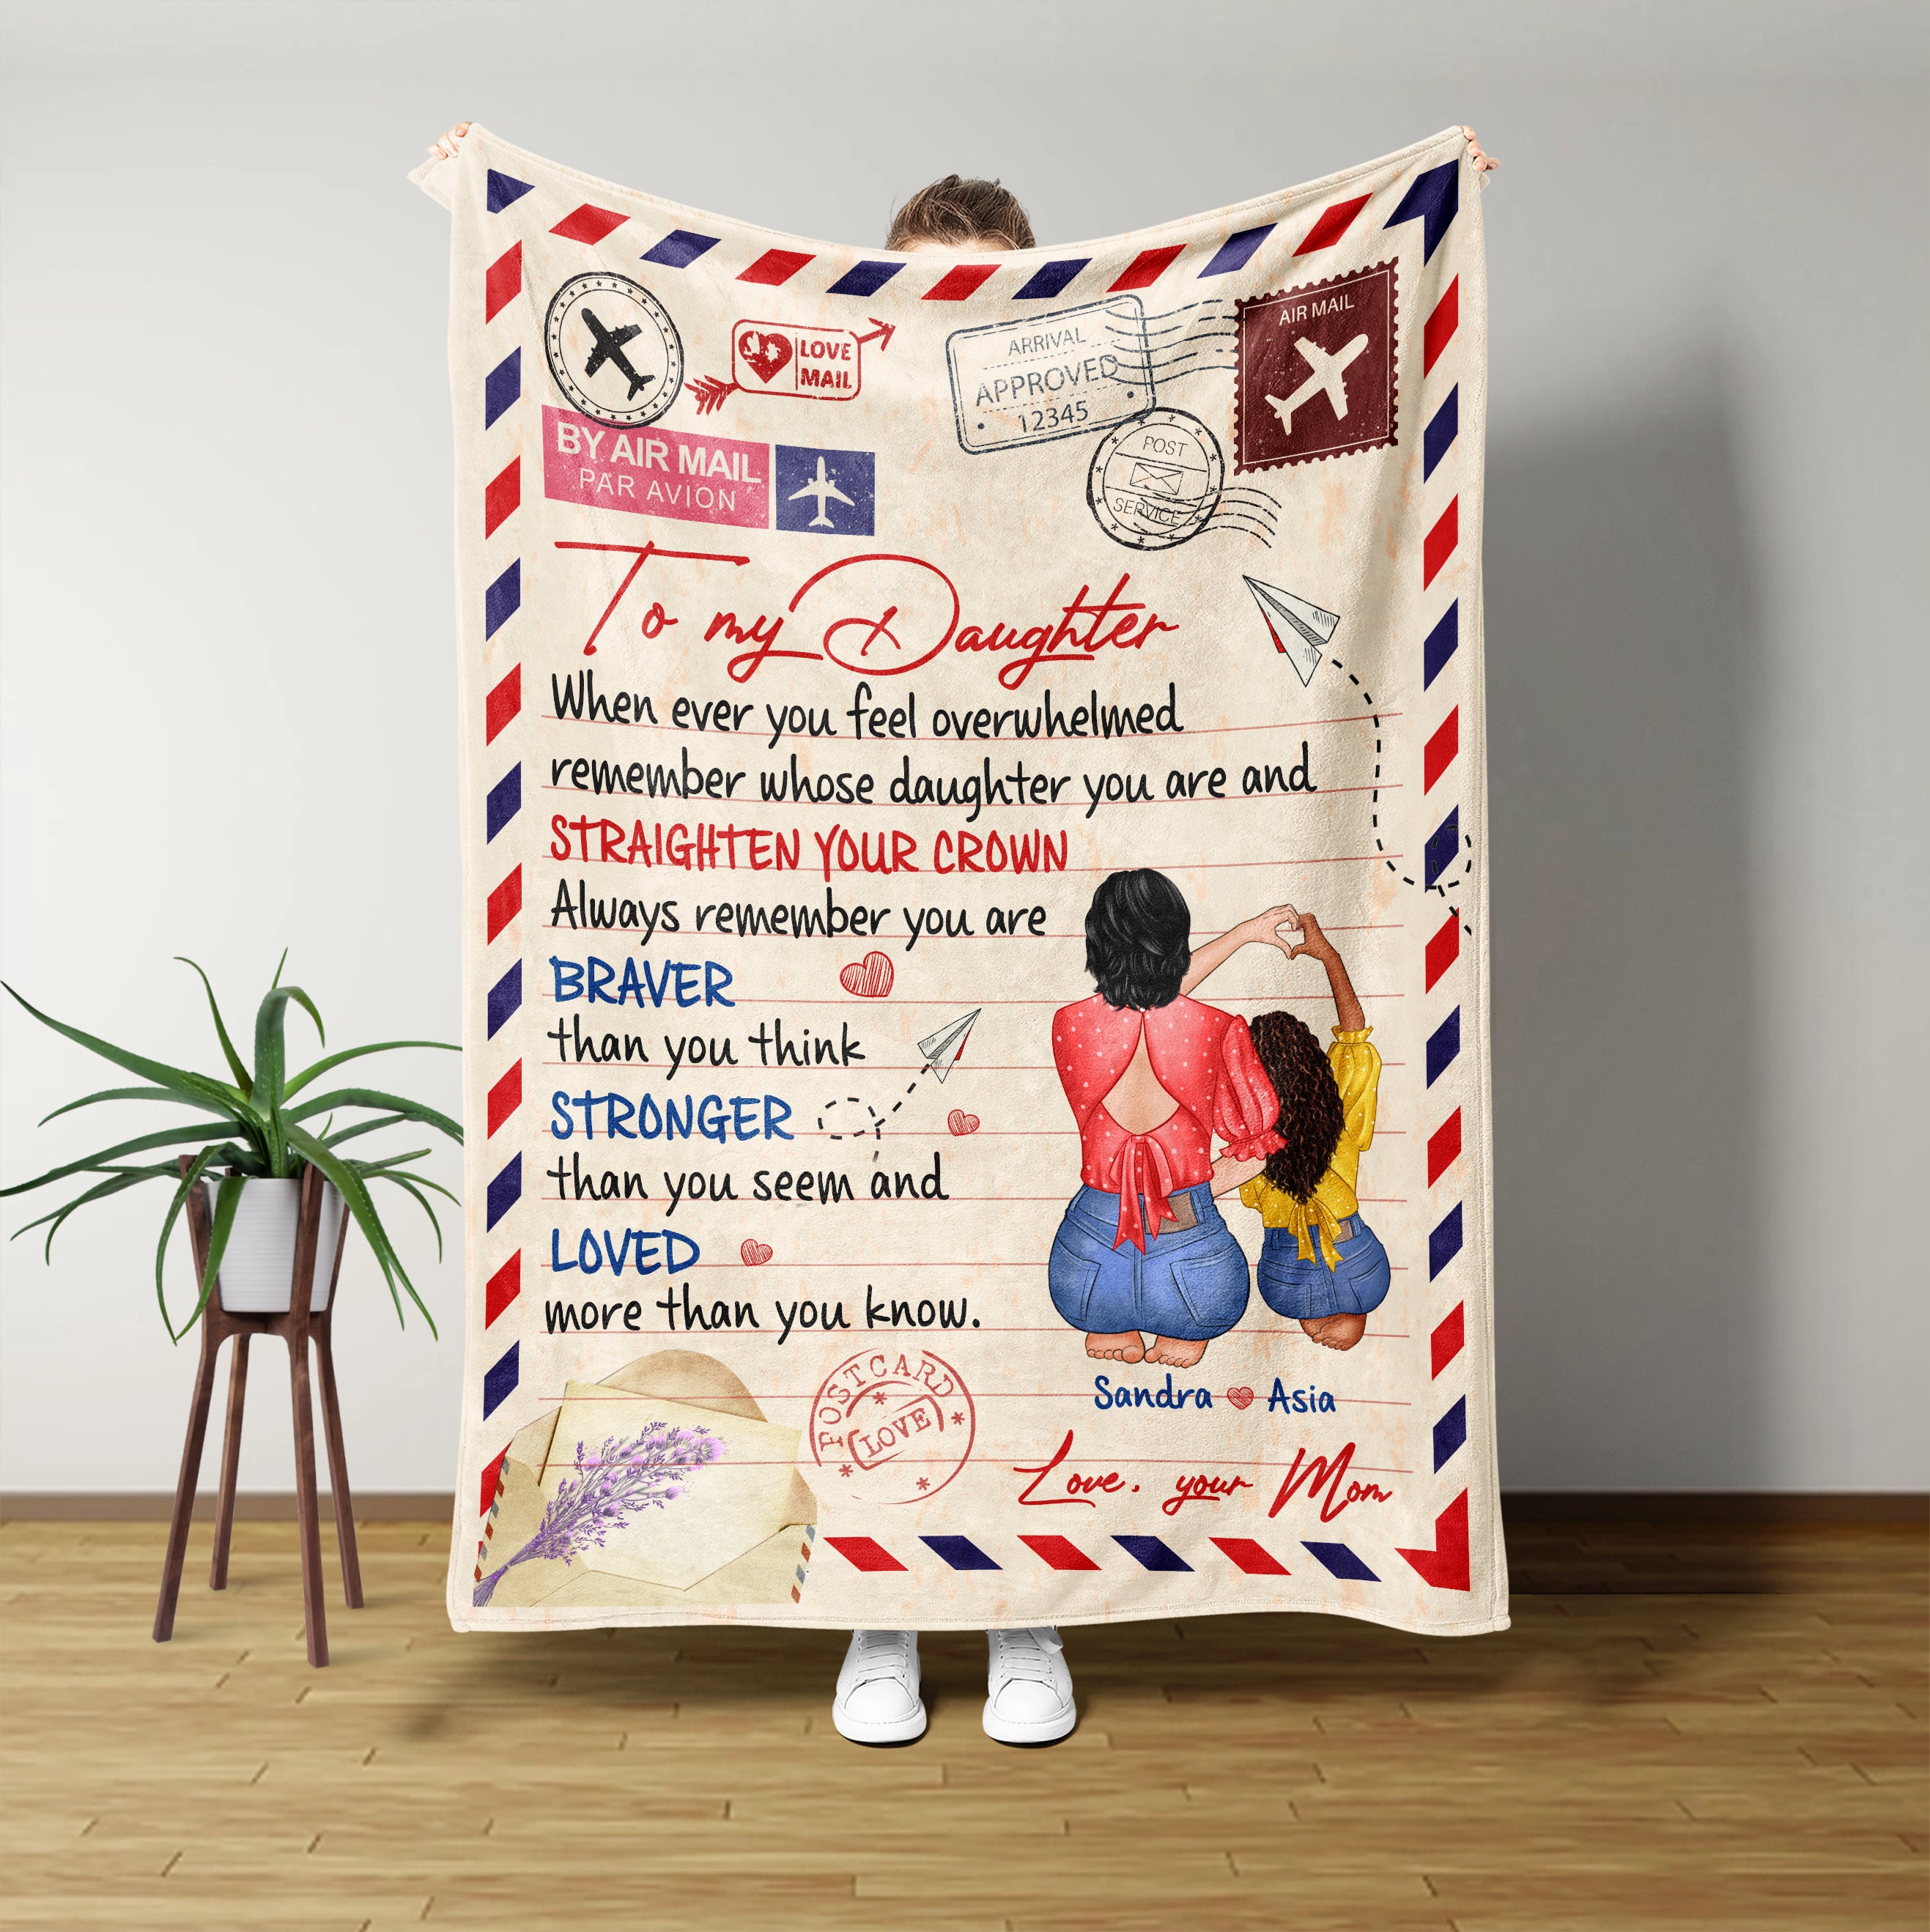  GUOTY Gifts for Mom Birthday Gifts for Women Mothers Day  Blanket from Daughter Son, Mom Gifts to My Mom, Thanksgiving Christmas  Birthday Gifts for Mother, Soft Throw Blanket 60x50 : Home